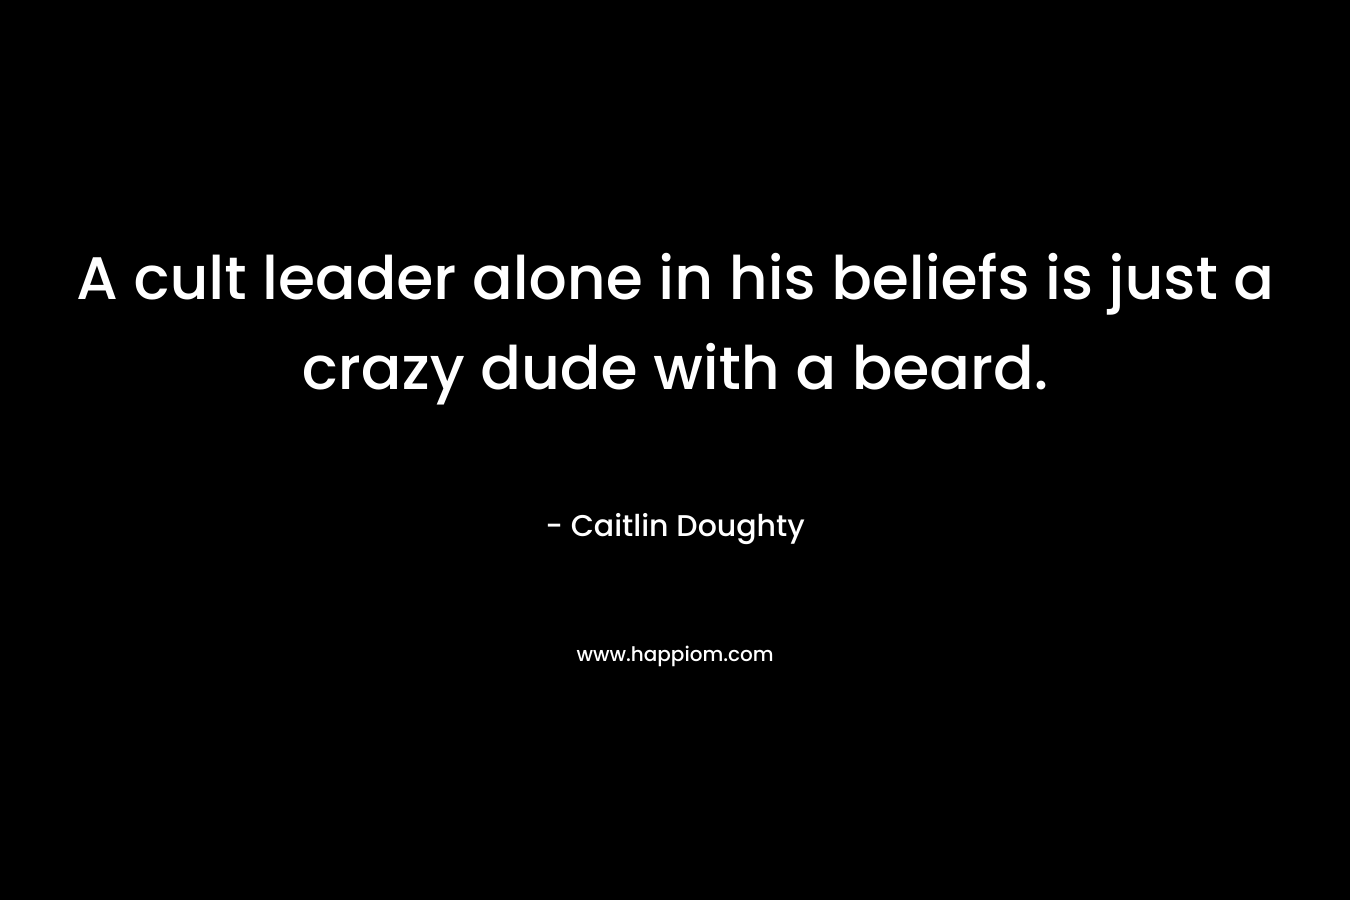 A cult leader alone in his beliefs is just a crazy dude with a beard. – Caitlin Doughty